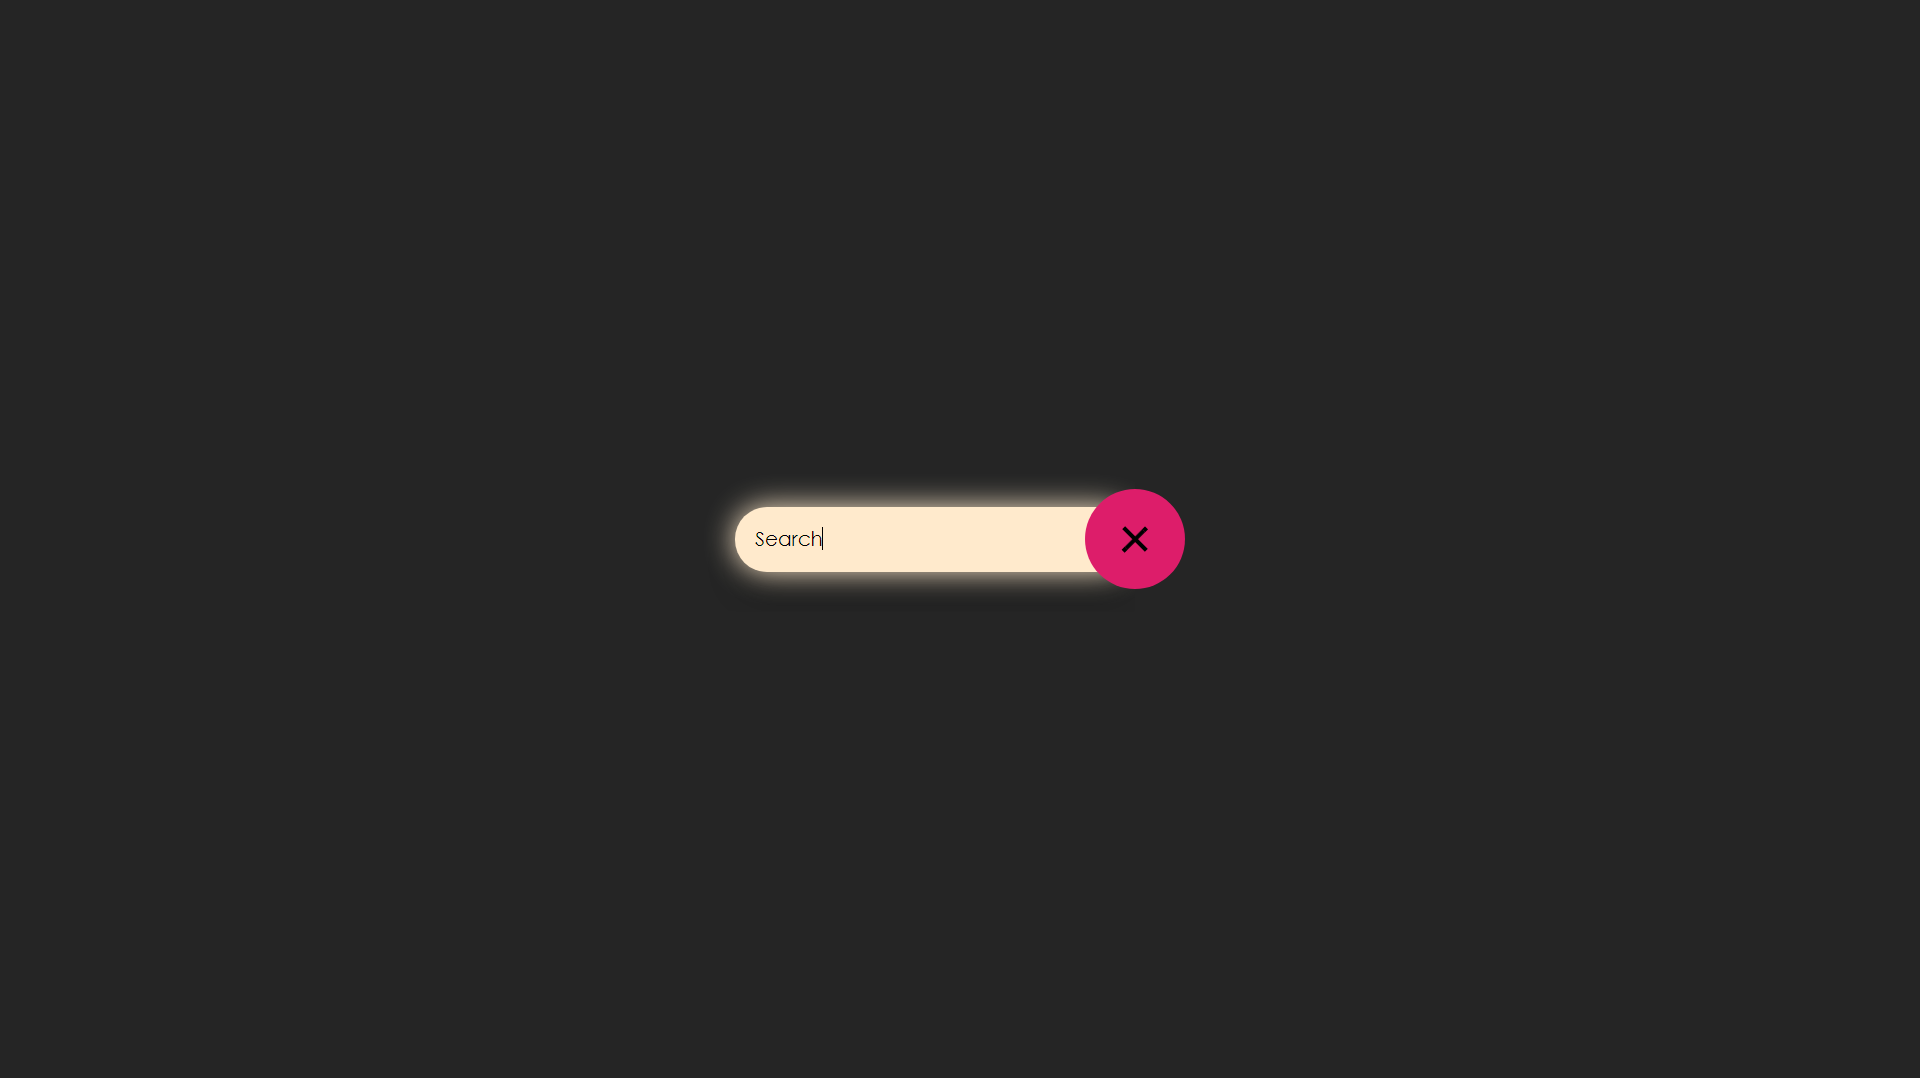 Pure CSS Expanding Search Bar